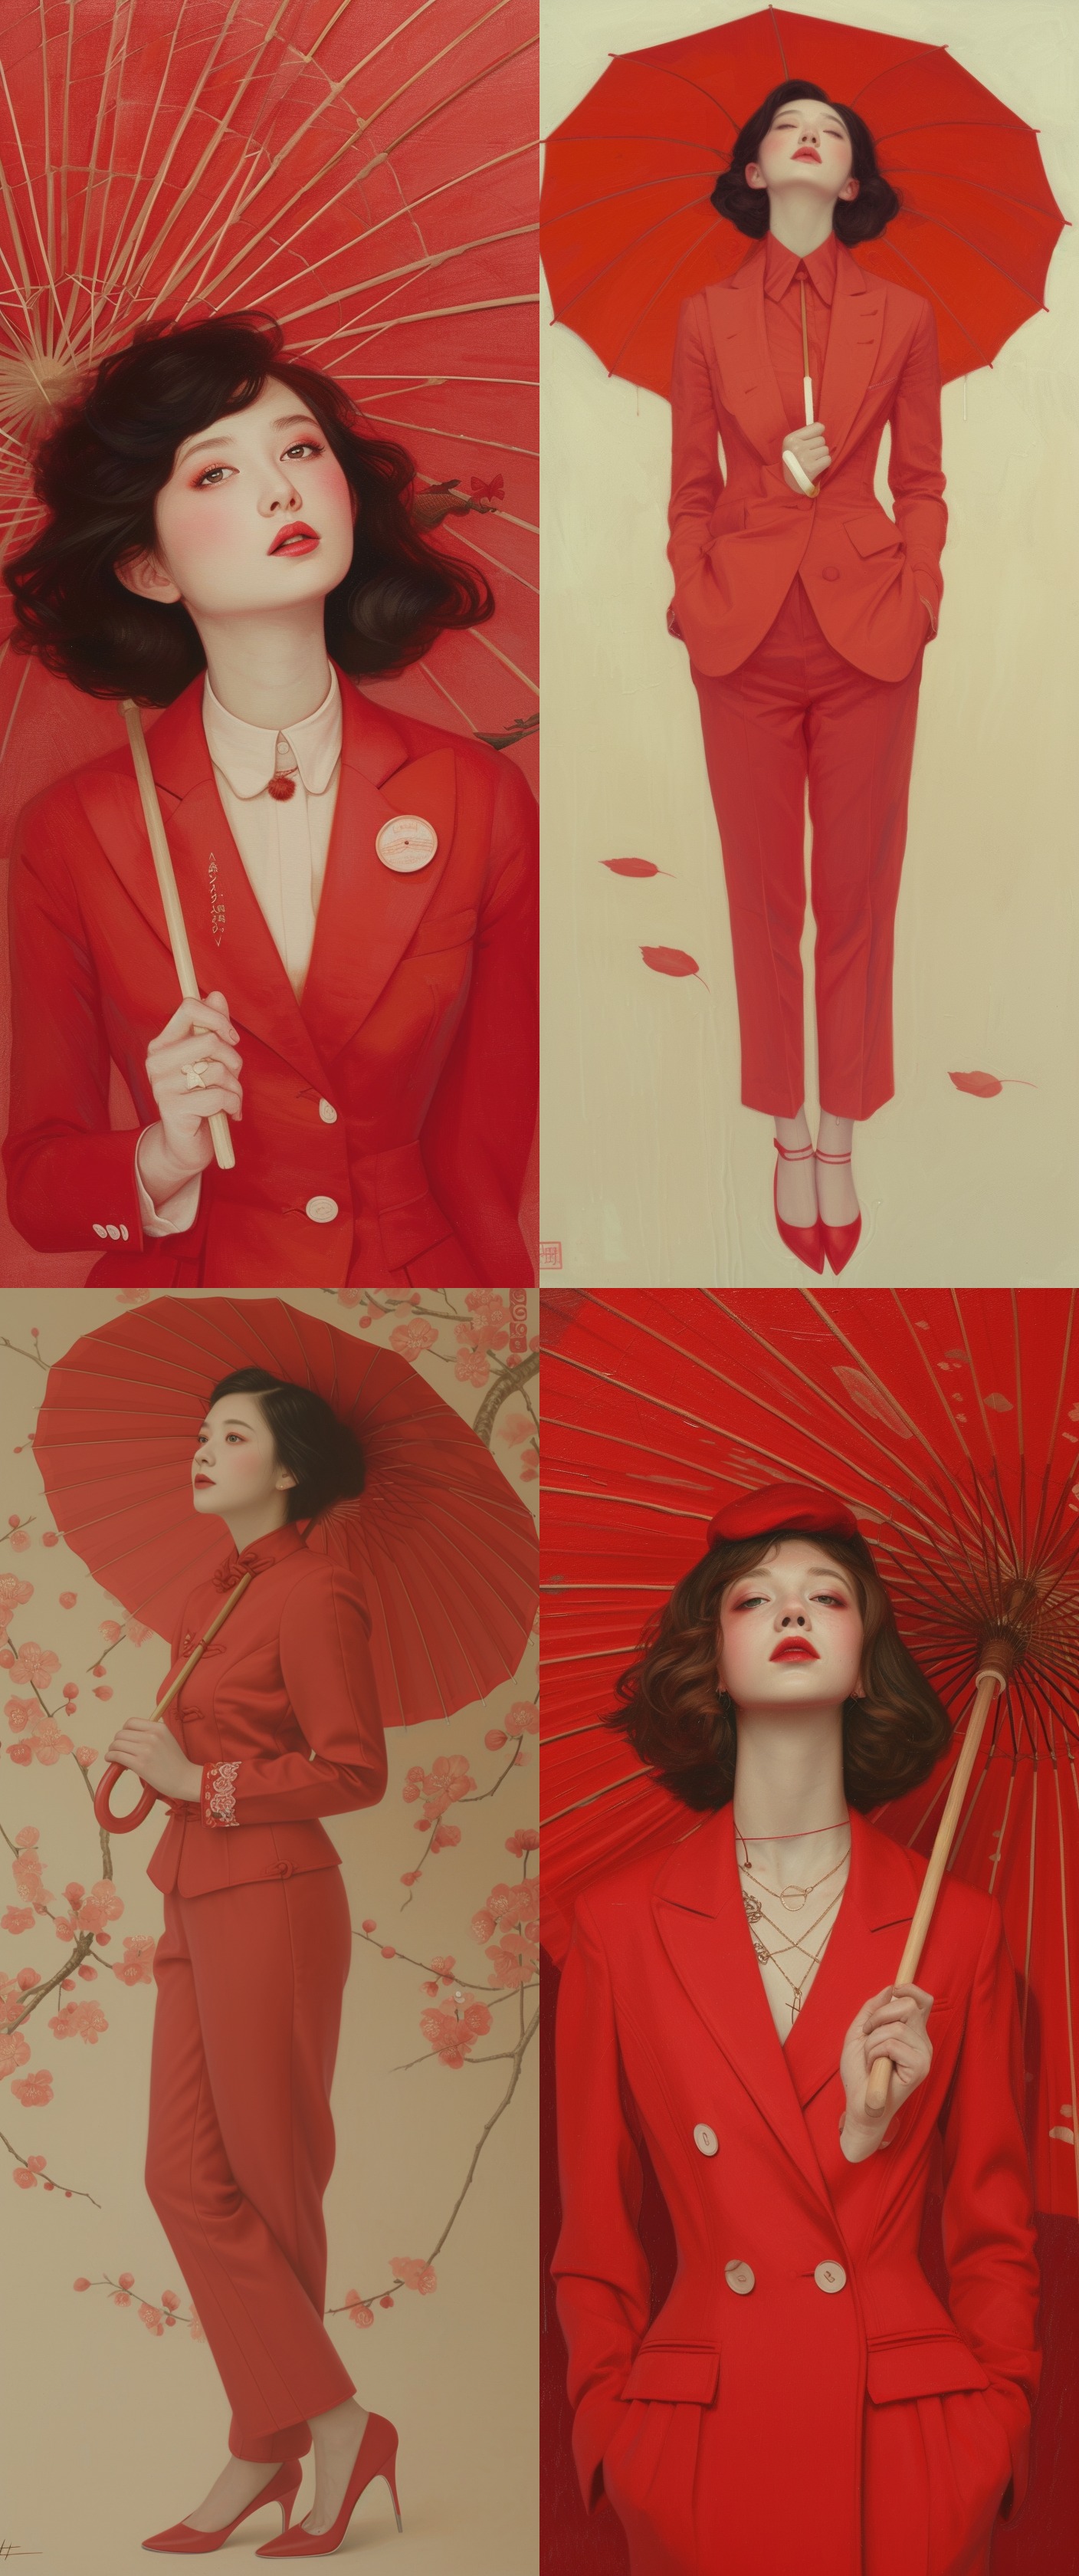 hxnpjfhjmw98_65407_woman_in_red_suit_with_red_umbrella_in_the_s_23605a8a-5c24-4b75-a85d-d2e6b45d4a2c